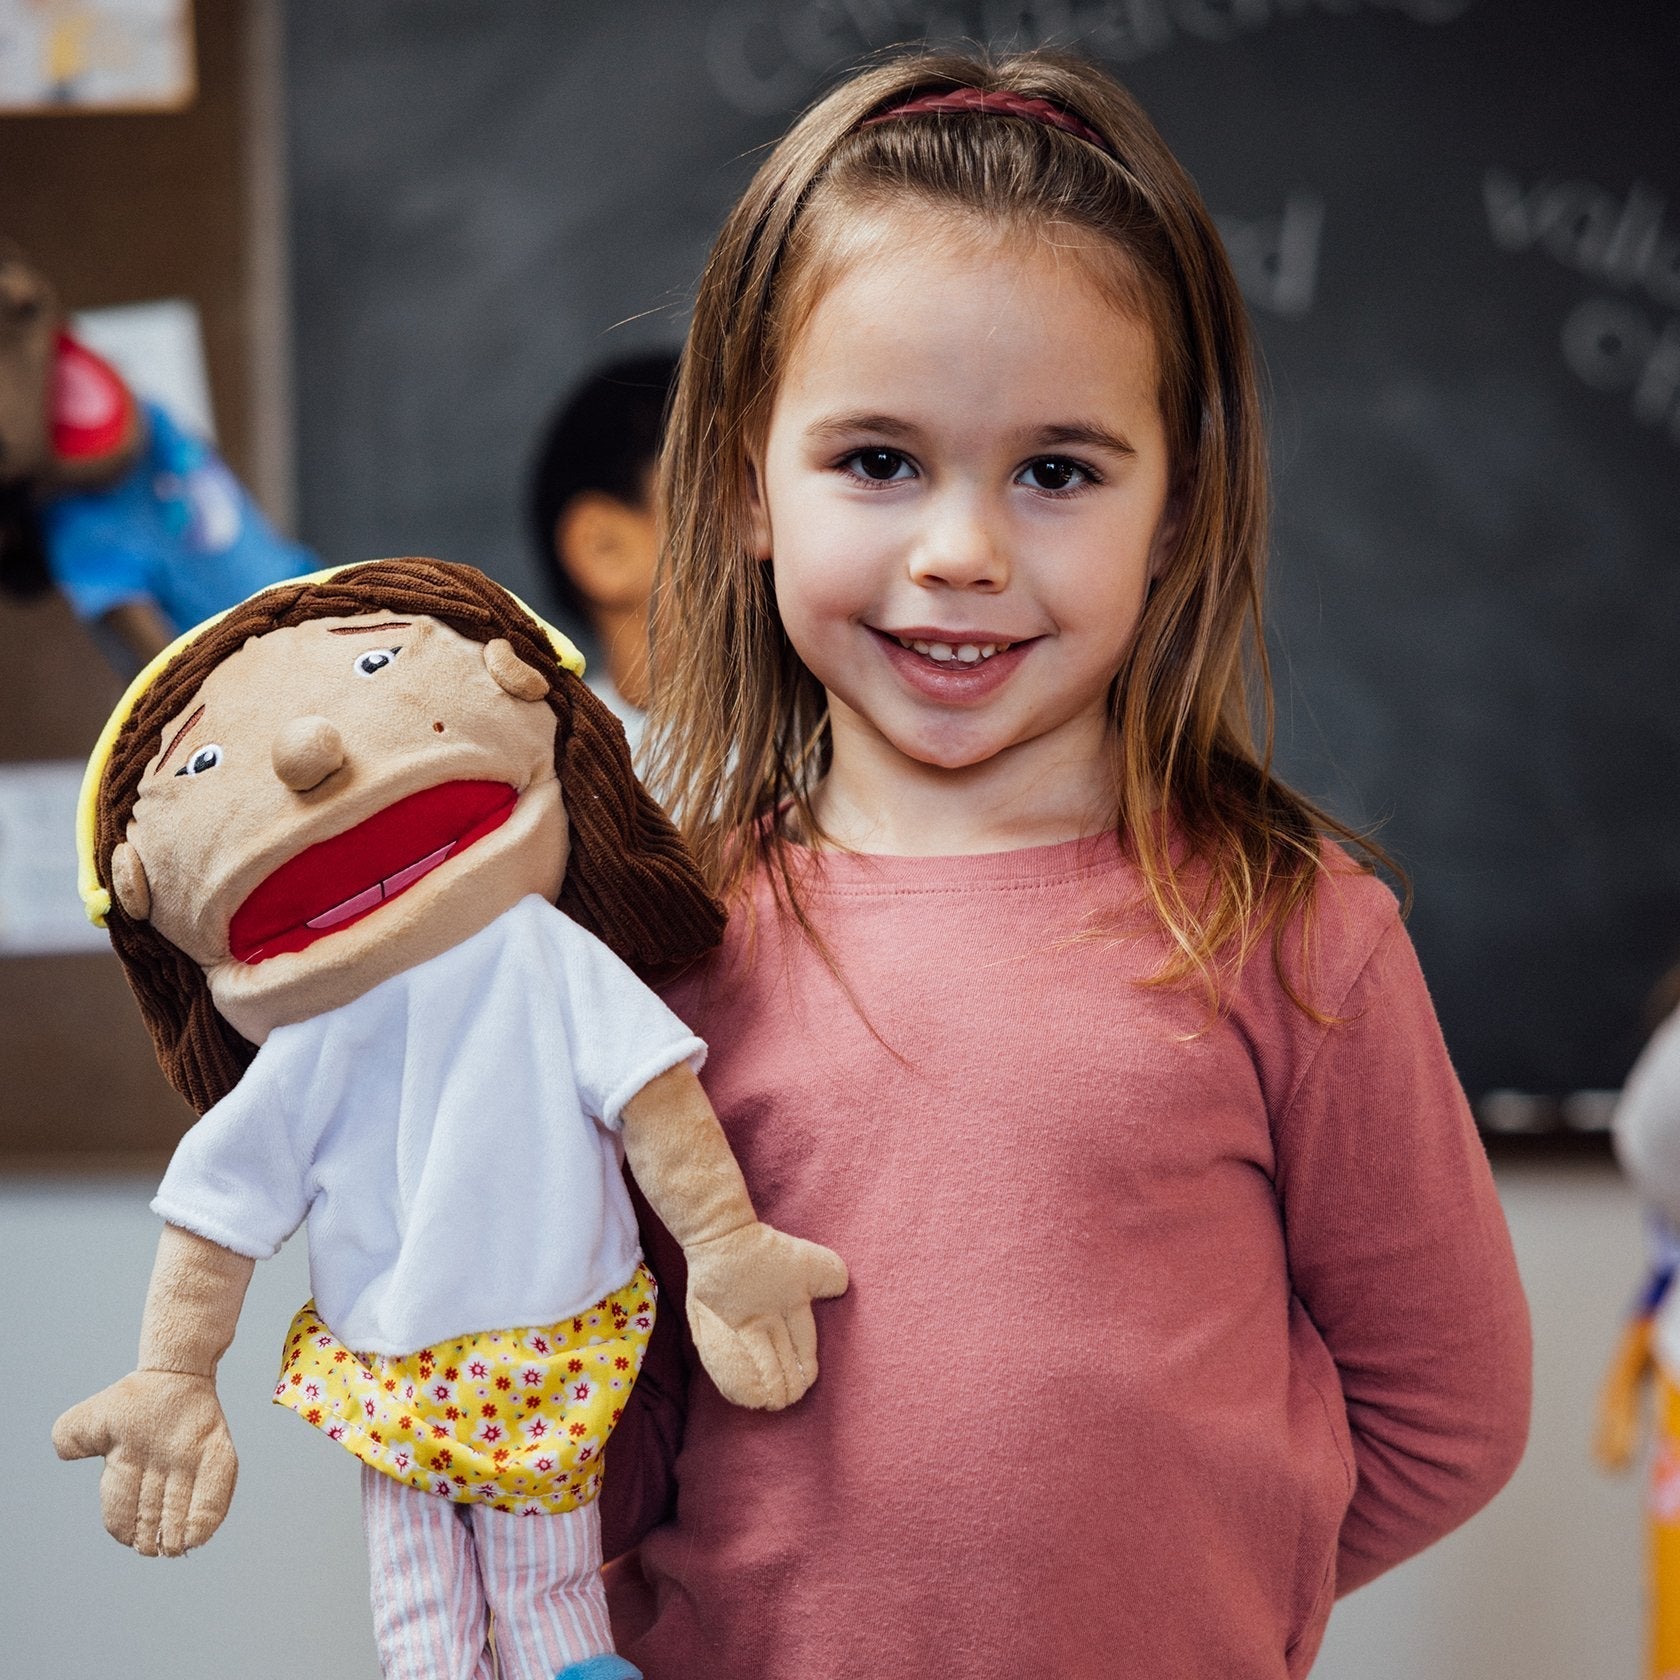 Julia's Puppet, Introducing Julia Rojas, the embodiment of spirit, friendship, and good sportsmanship, brought to life through the vibrant and engaging design of our newest kid puppet. Designed to foster emotional expression and spur the wildest bounds of imaginative play, Julia Rojas is ready to become your child's new favorite playmate, aiding in their personal and emotional development one playful adventure at a time. Product Features Superior Craftsmanship for Safe Play Adhering strictly to child safety